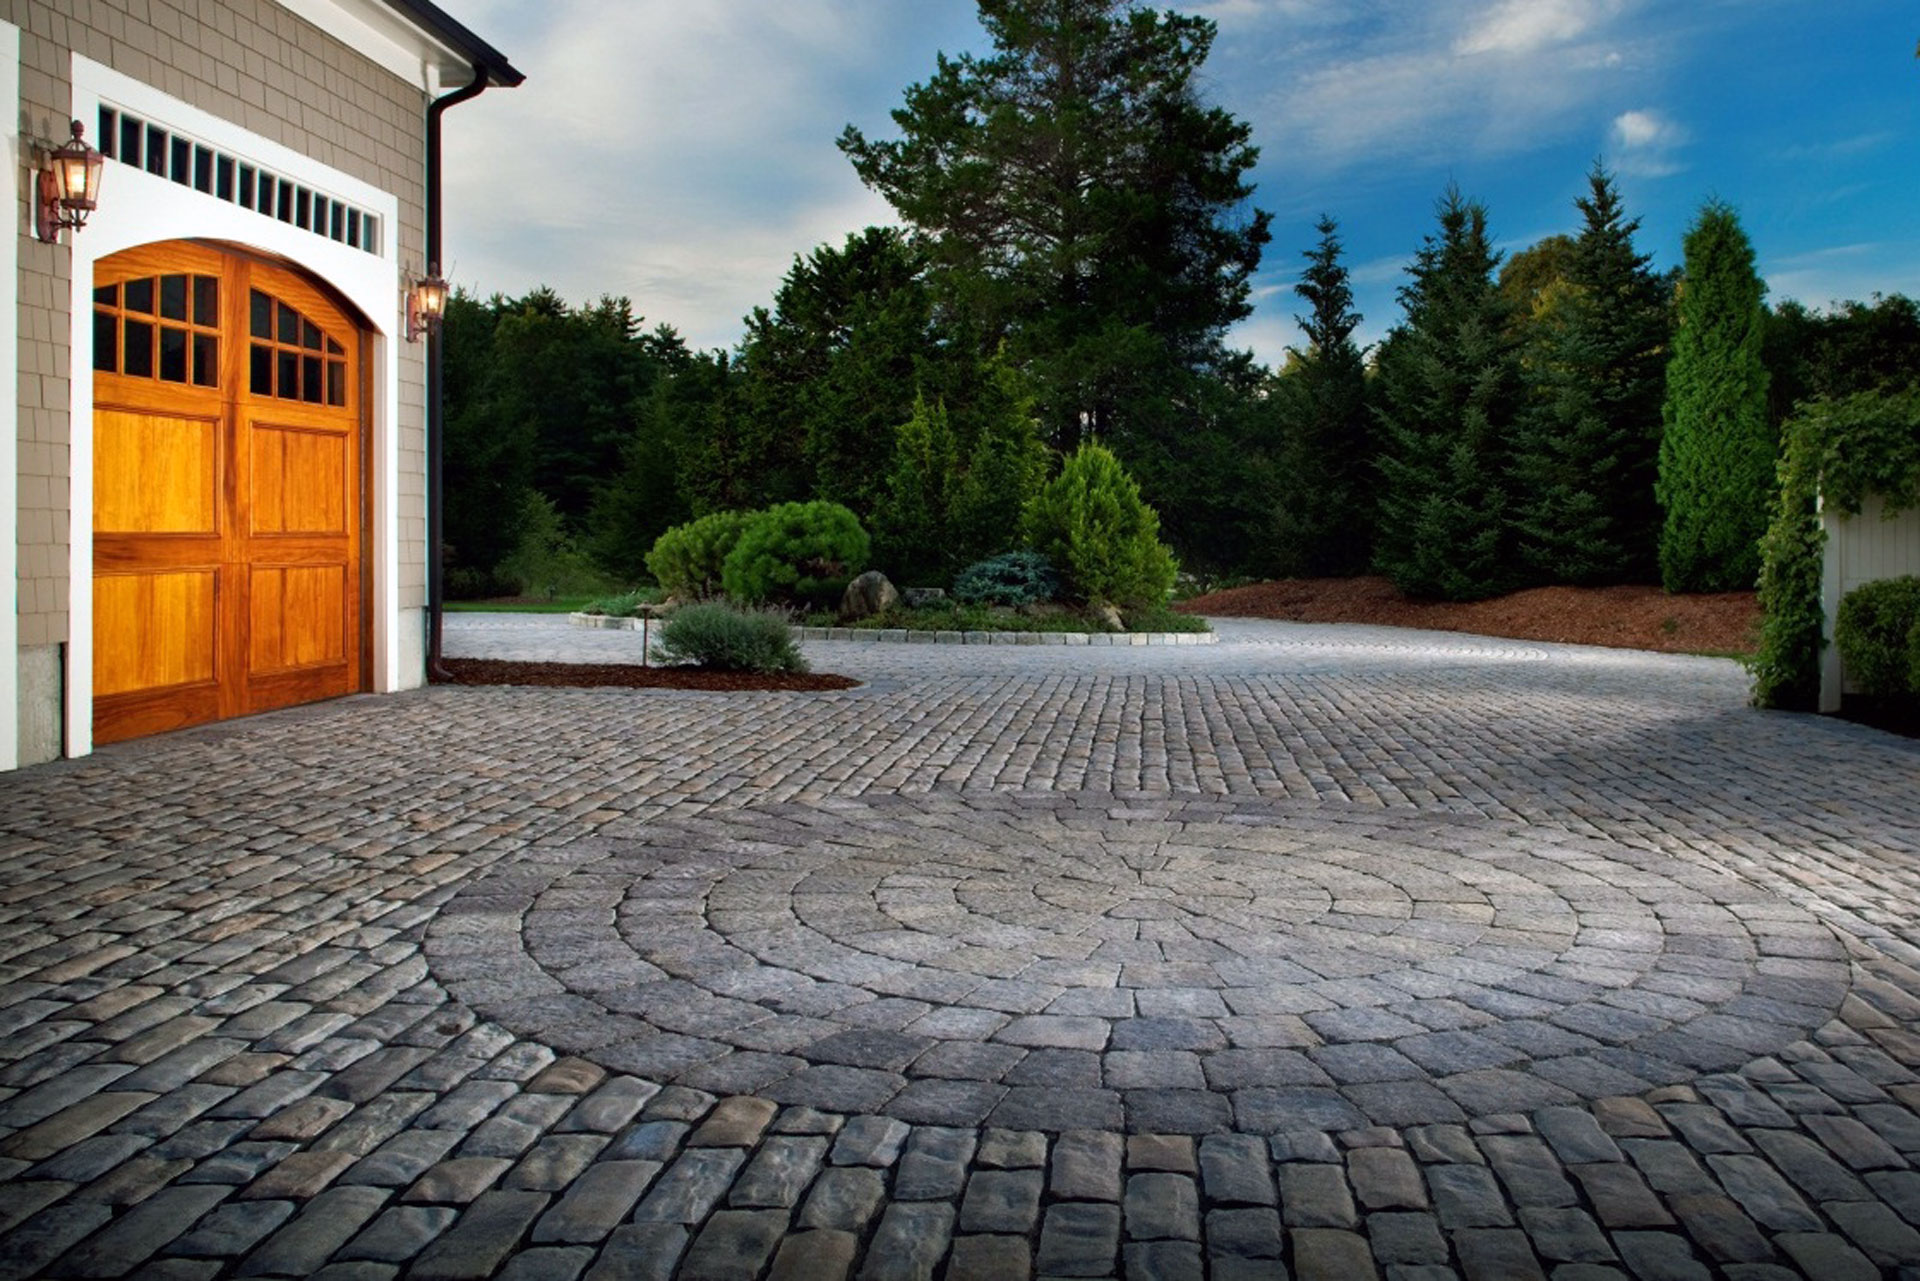 The Most Durable Driveways of All Times